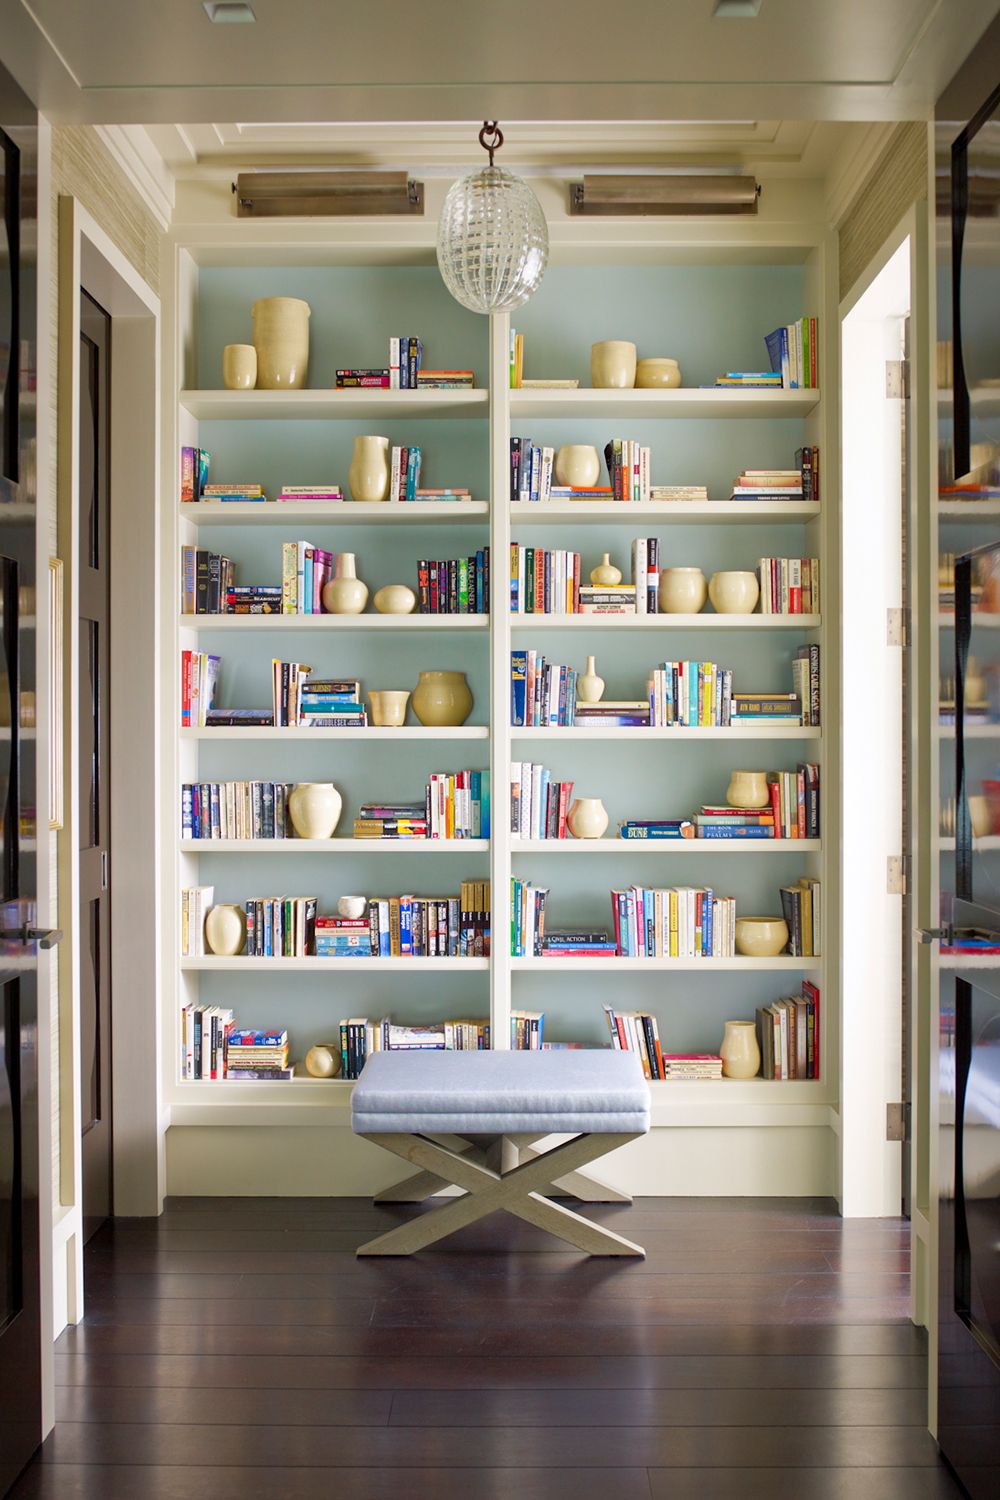 Floor To Ceiling Shelving Ideas, Built In Bookcases And Shelves